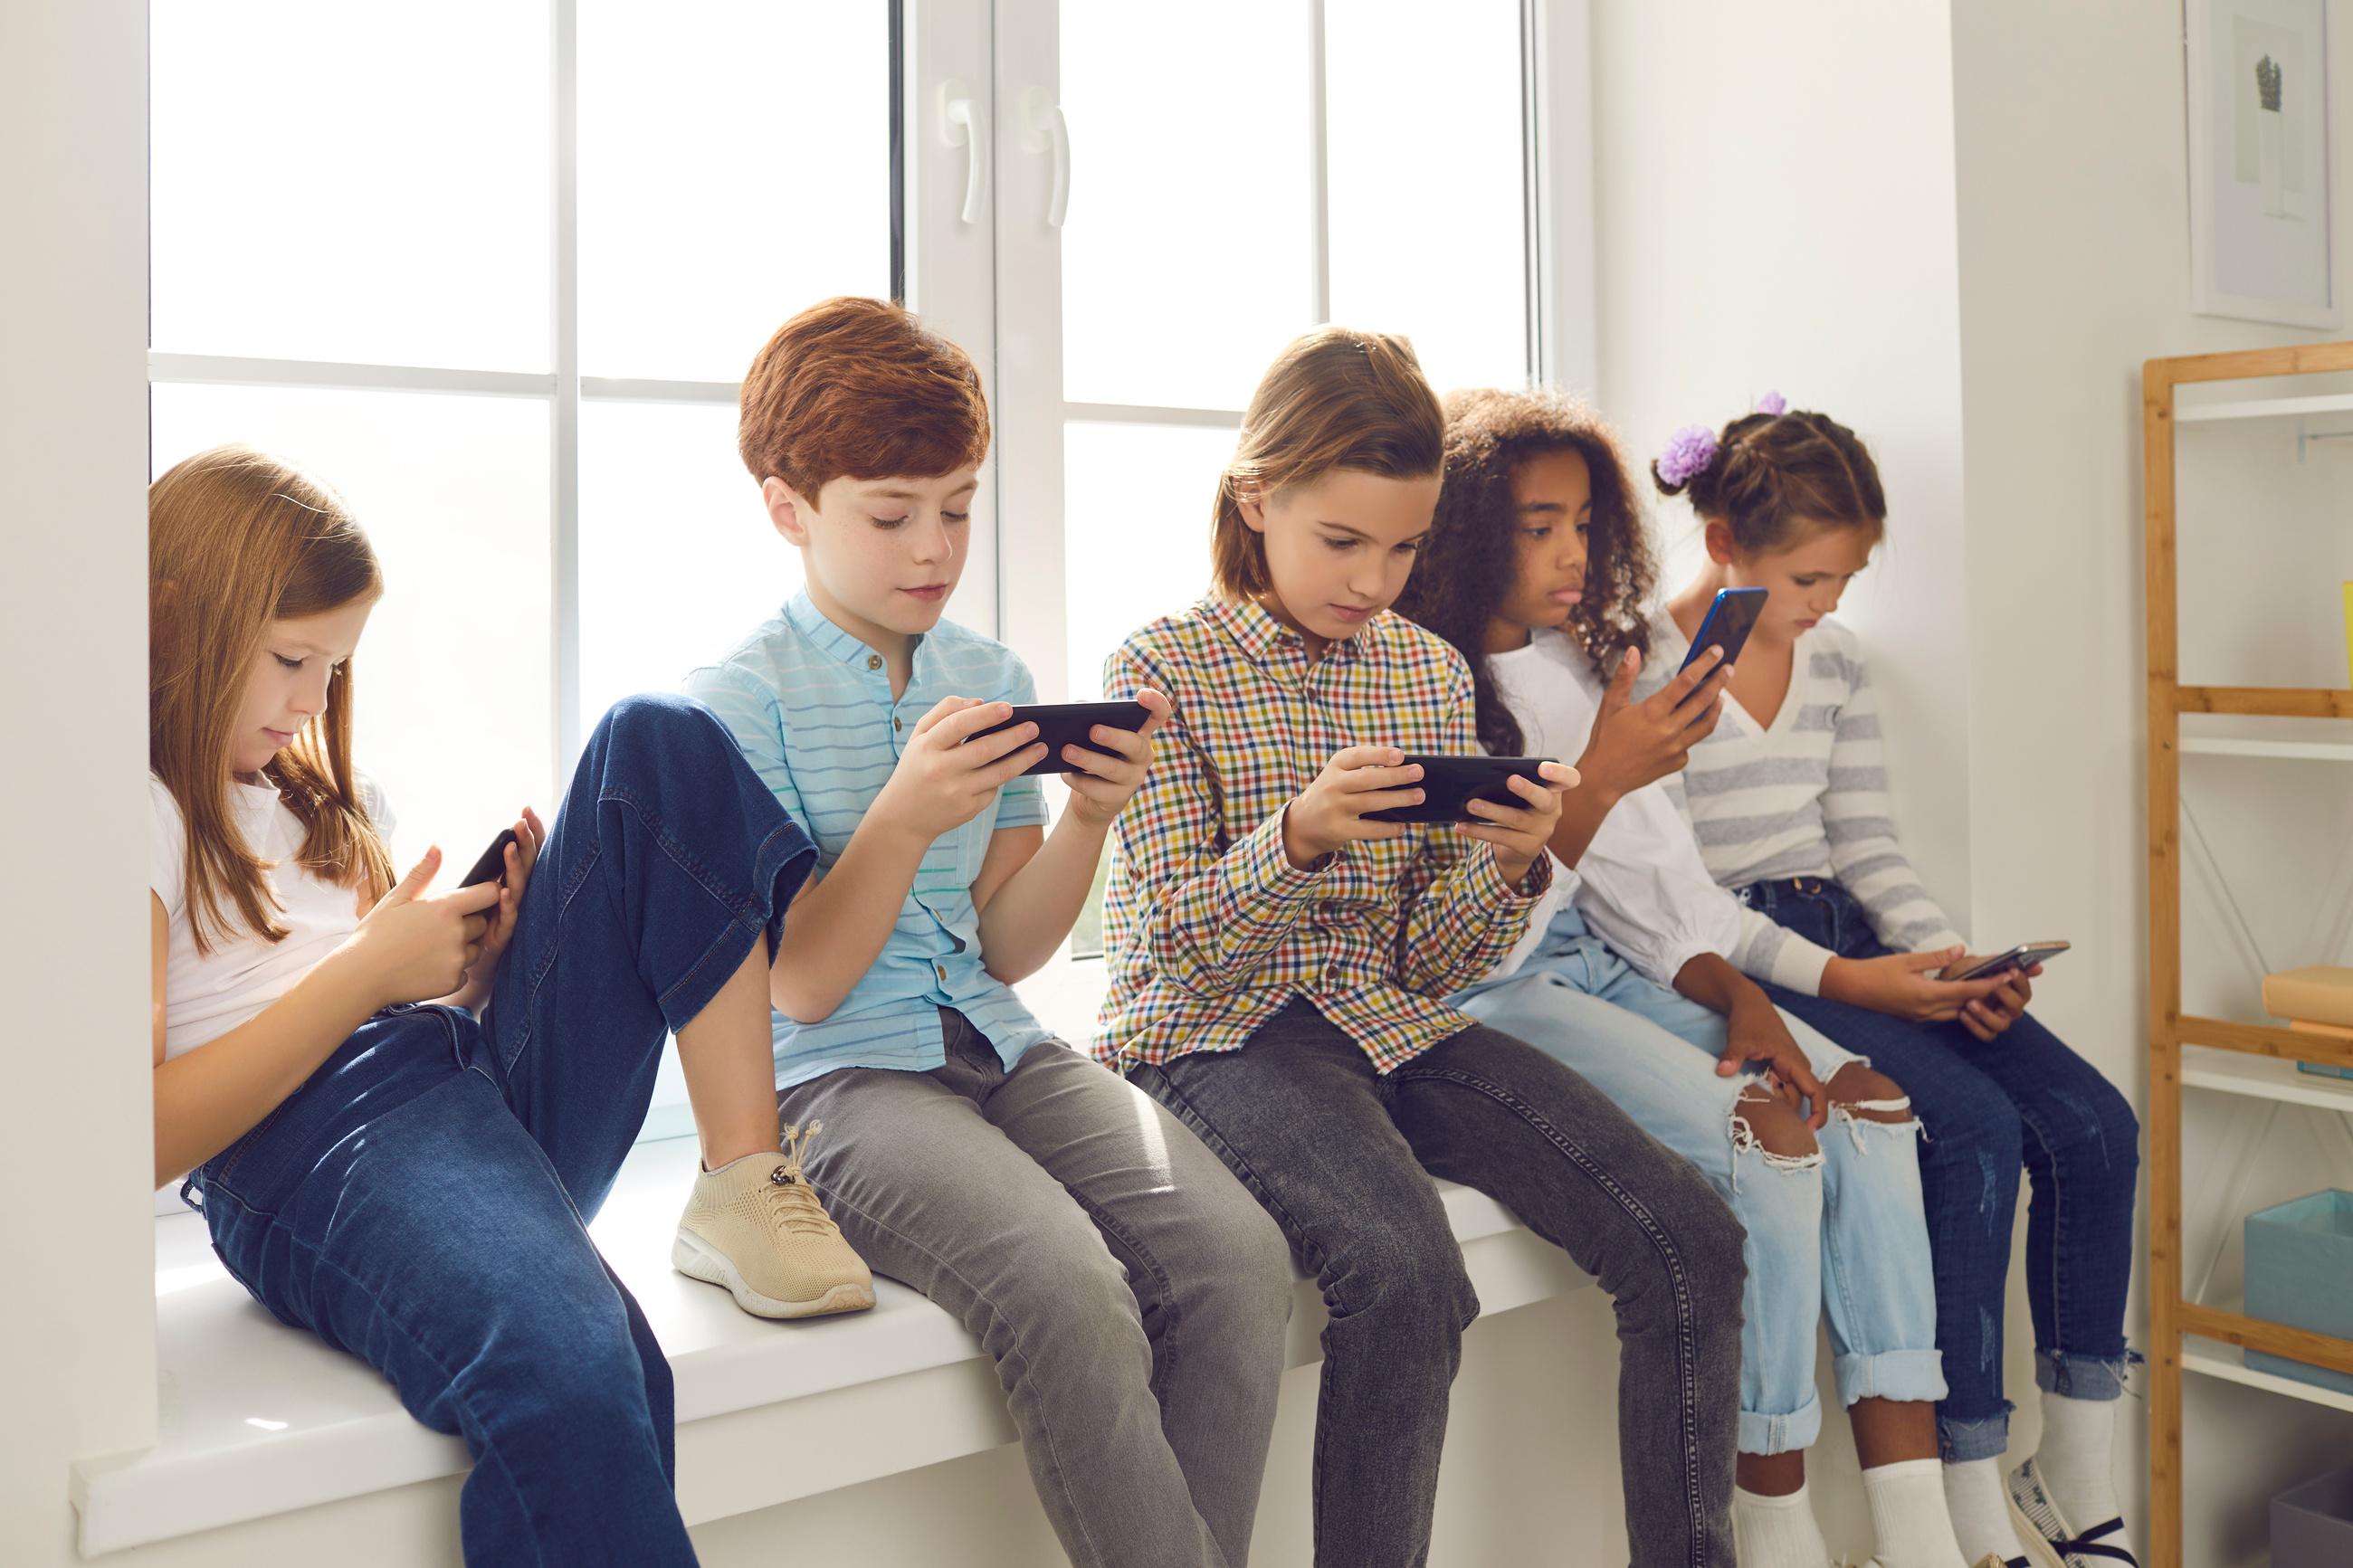 Children Sitting on Windowsill, Playing Online Games on Mobile Phones and Ignoring Each Other